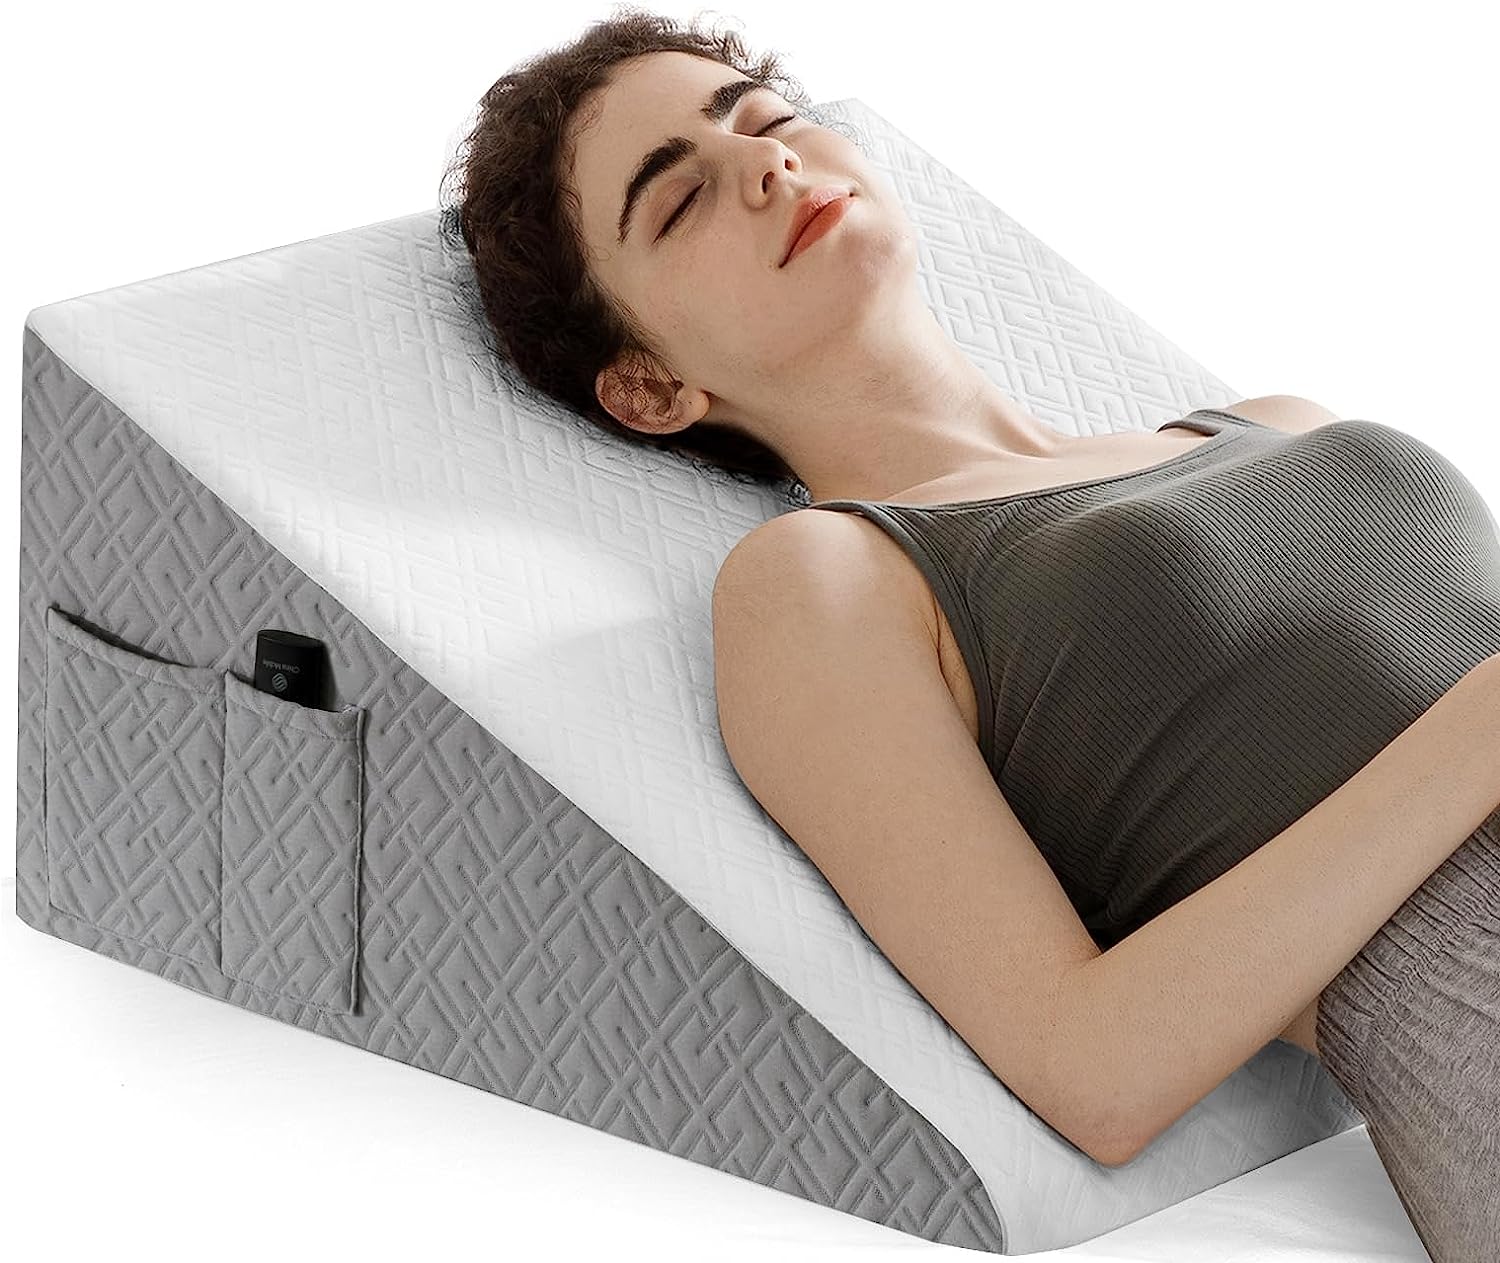 HBlife Wedge Pillow for Sleeping